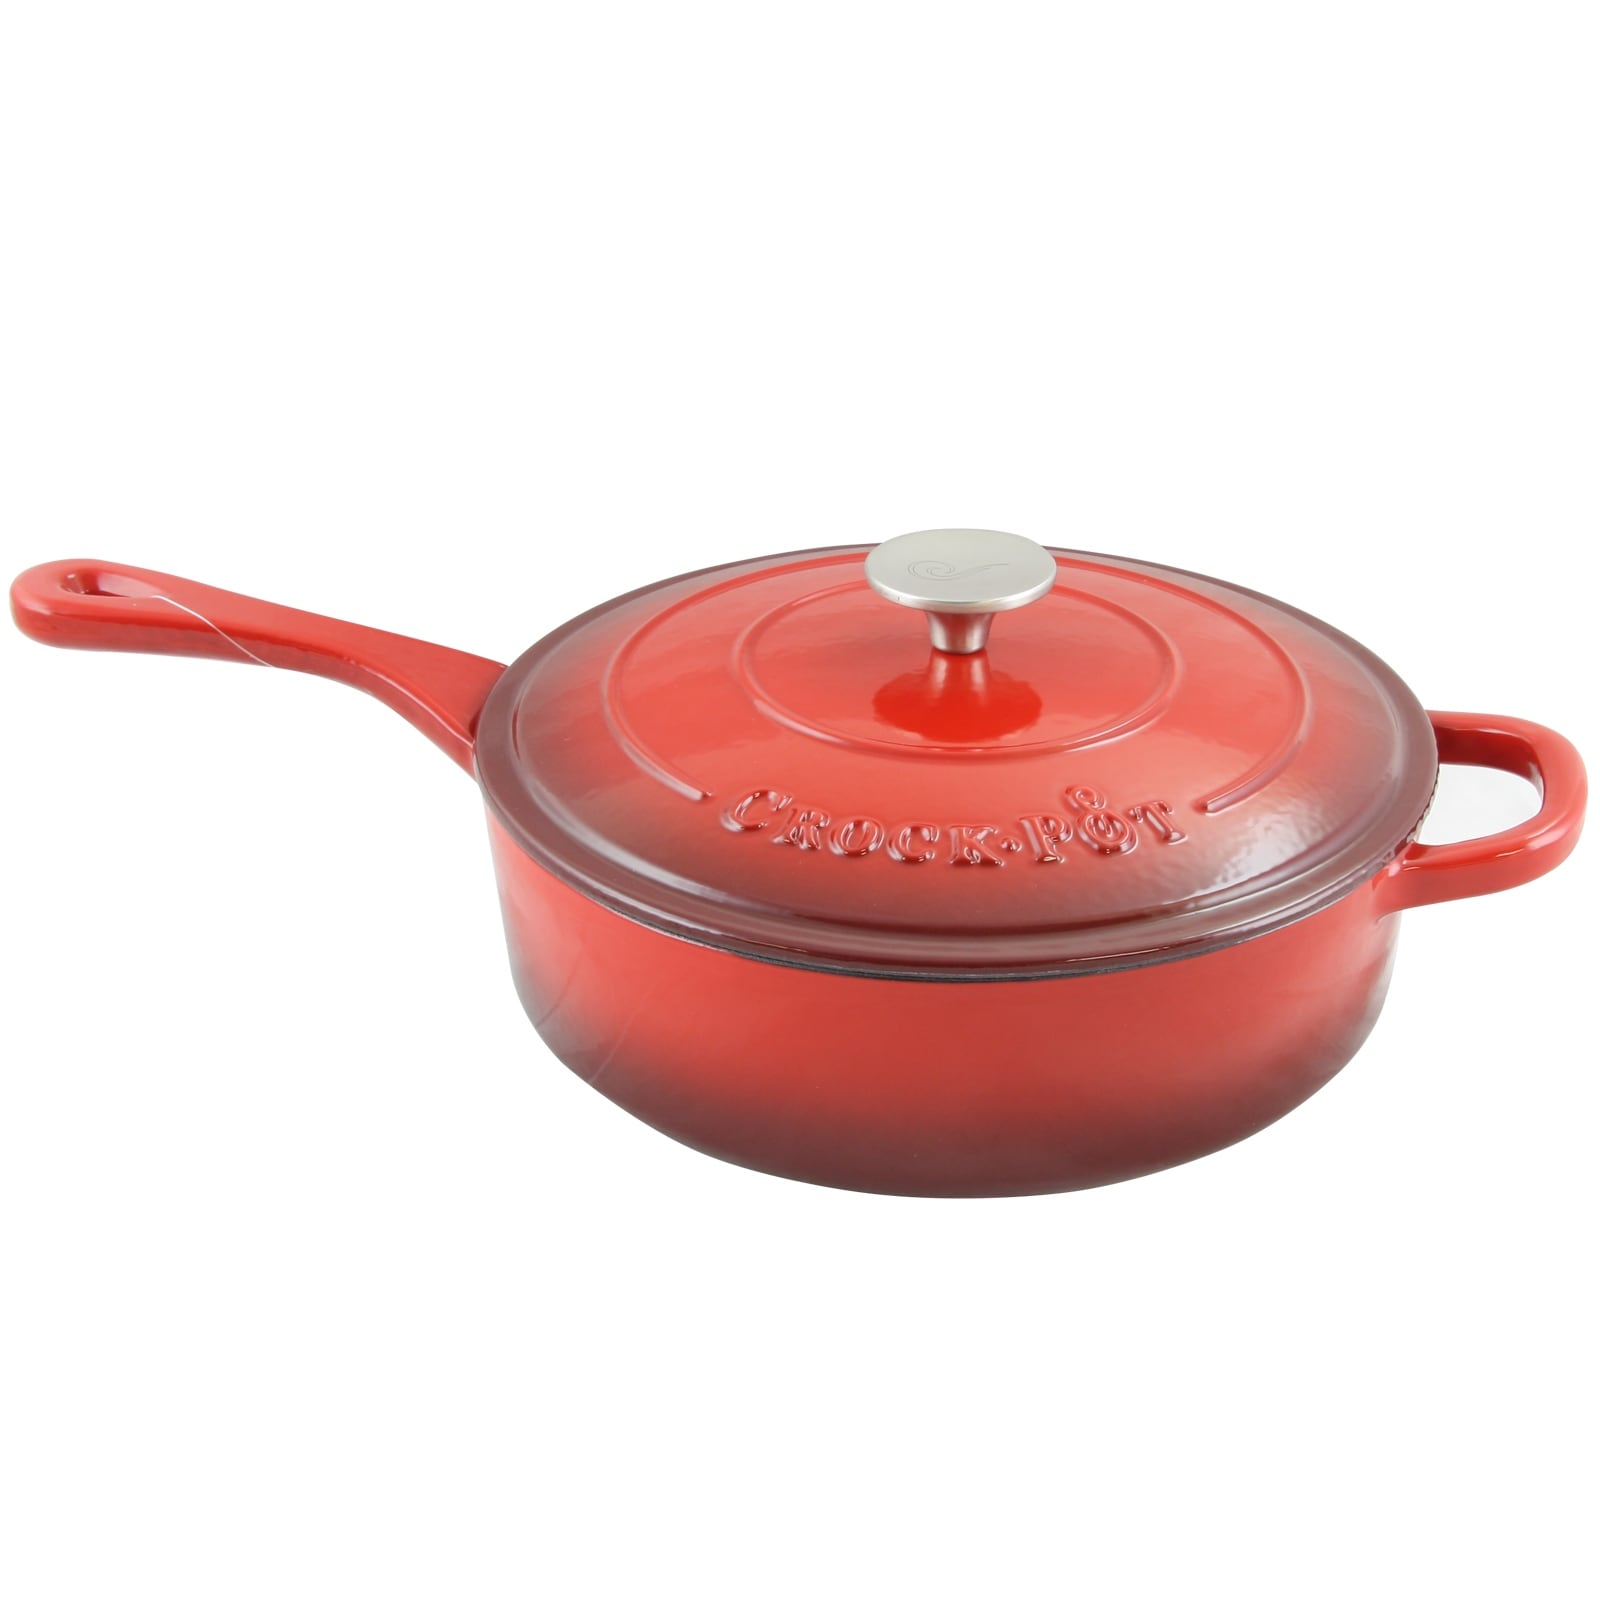 https://ak1.ostkcdn.com/images/products/is/images/direct/cb661e753cdc9599215b15880470995a008eac82/Crock-Pot-Artisan-3.5-Quart-Enameled-Cast-Iron-Deep-Saut%26eacute%3B-Pan-With-Self-Basting-Lid-in-Scarlet-Red.jpg